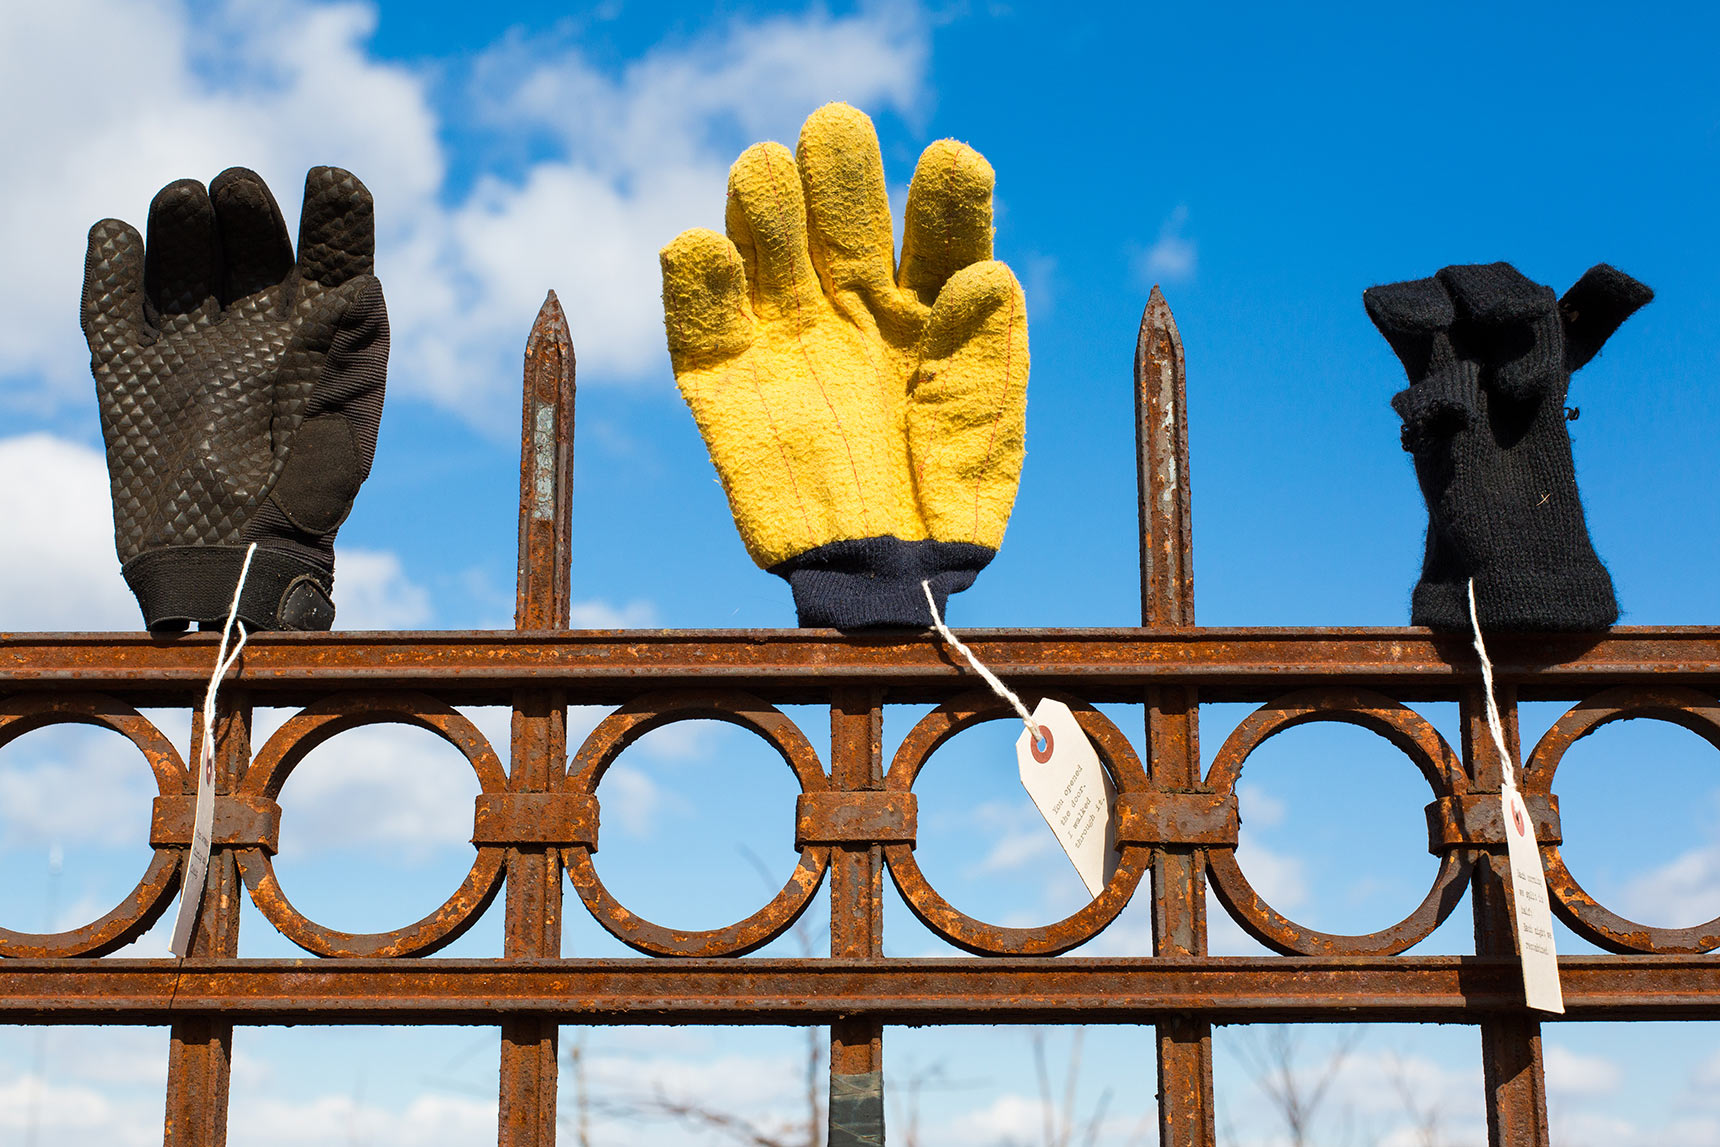 found gloves with notes displayed on a wrought iron fence in the Library of Lost Gloves & Lost Loves participatory public art installation by artist Bruce Willen